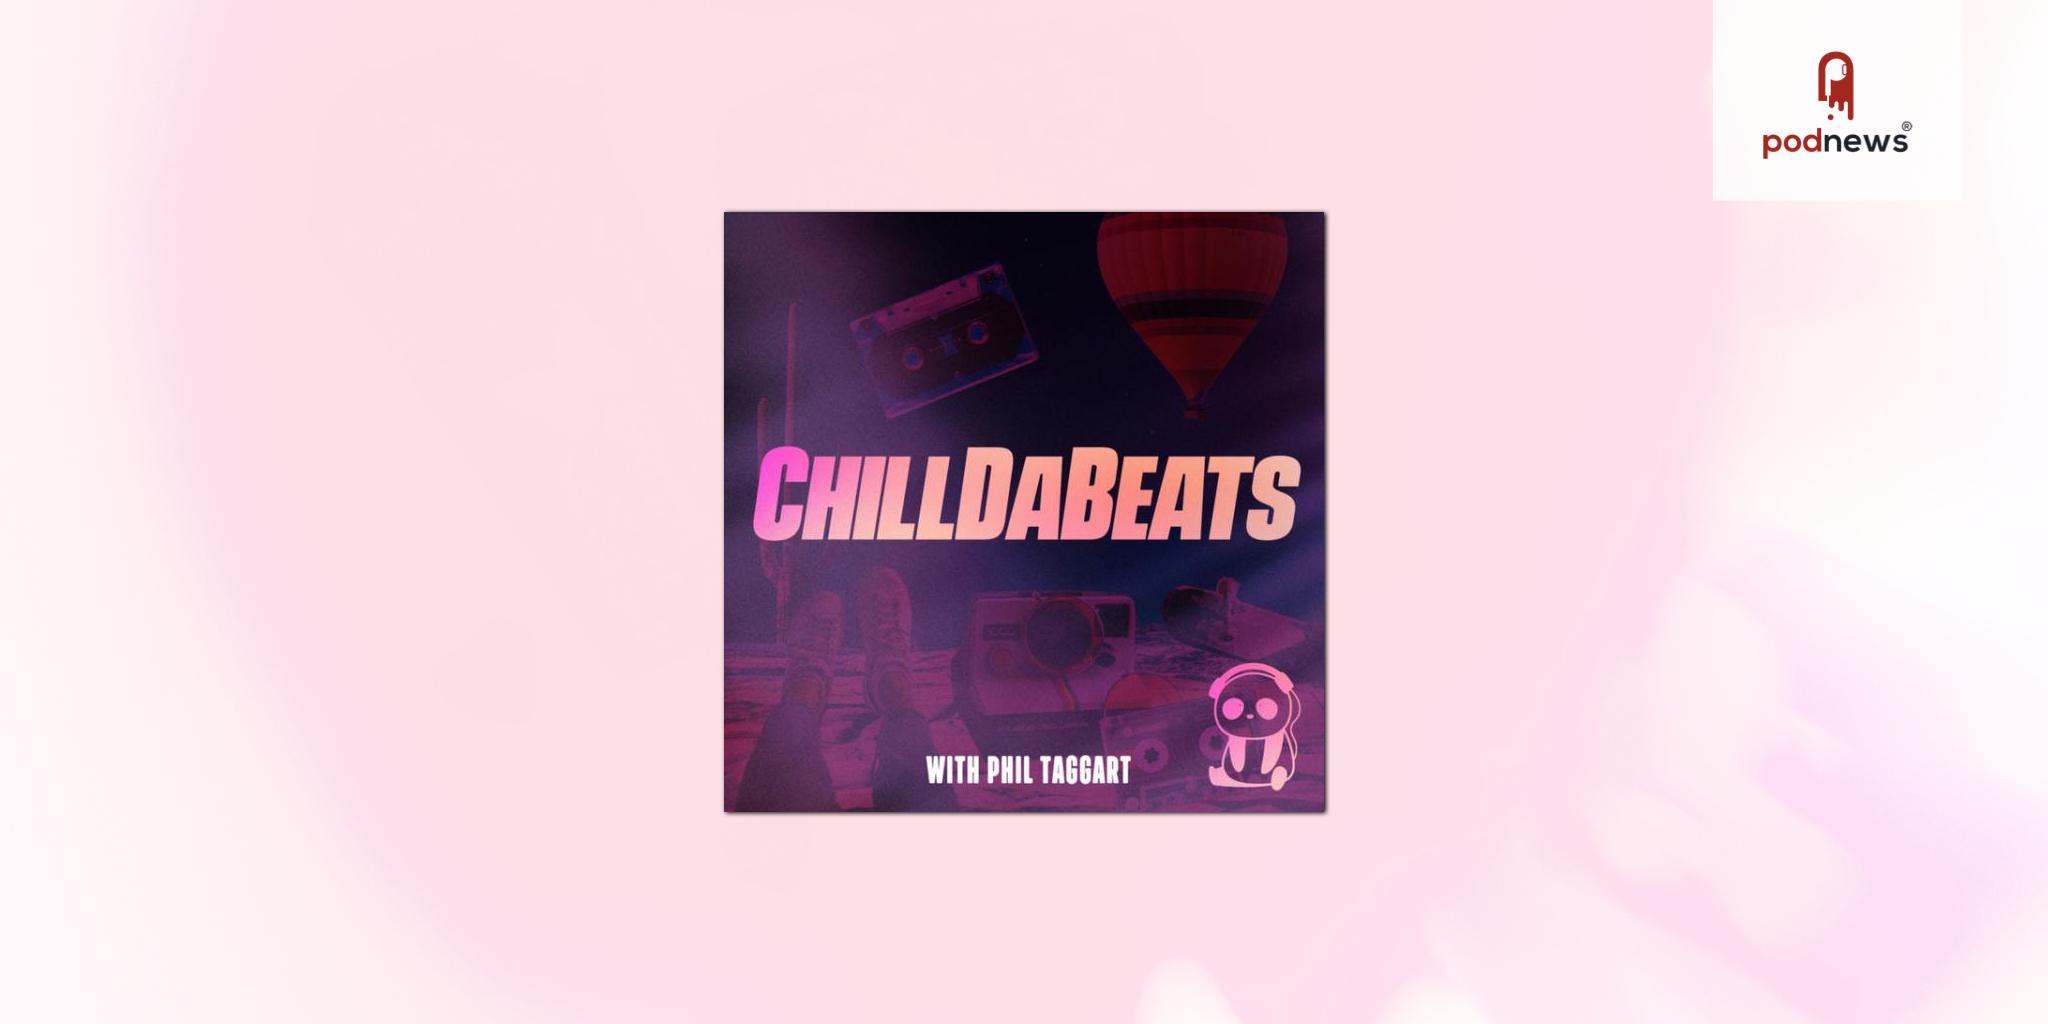 Former Radio 1 DJ Phil Taggart launches ChillDaBeats